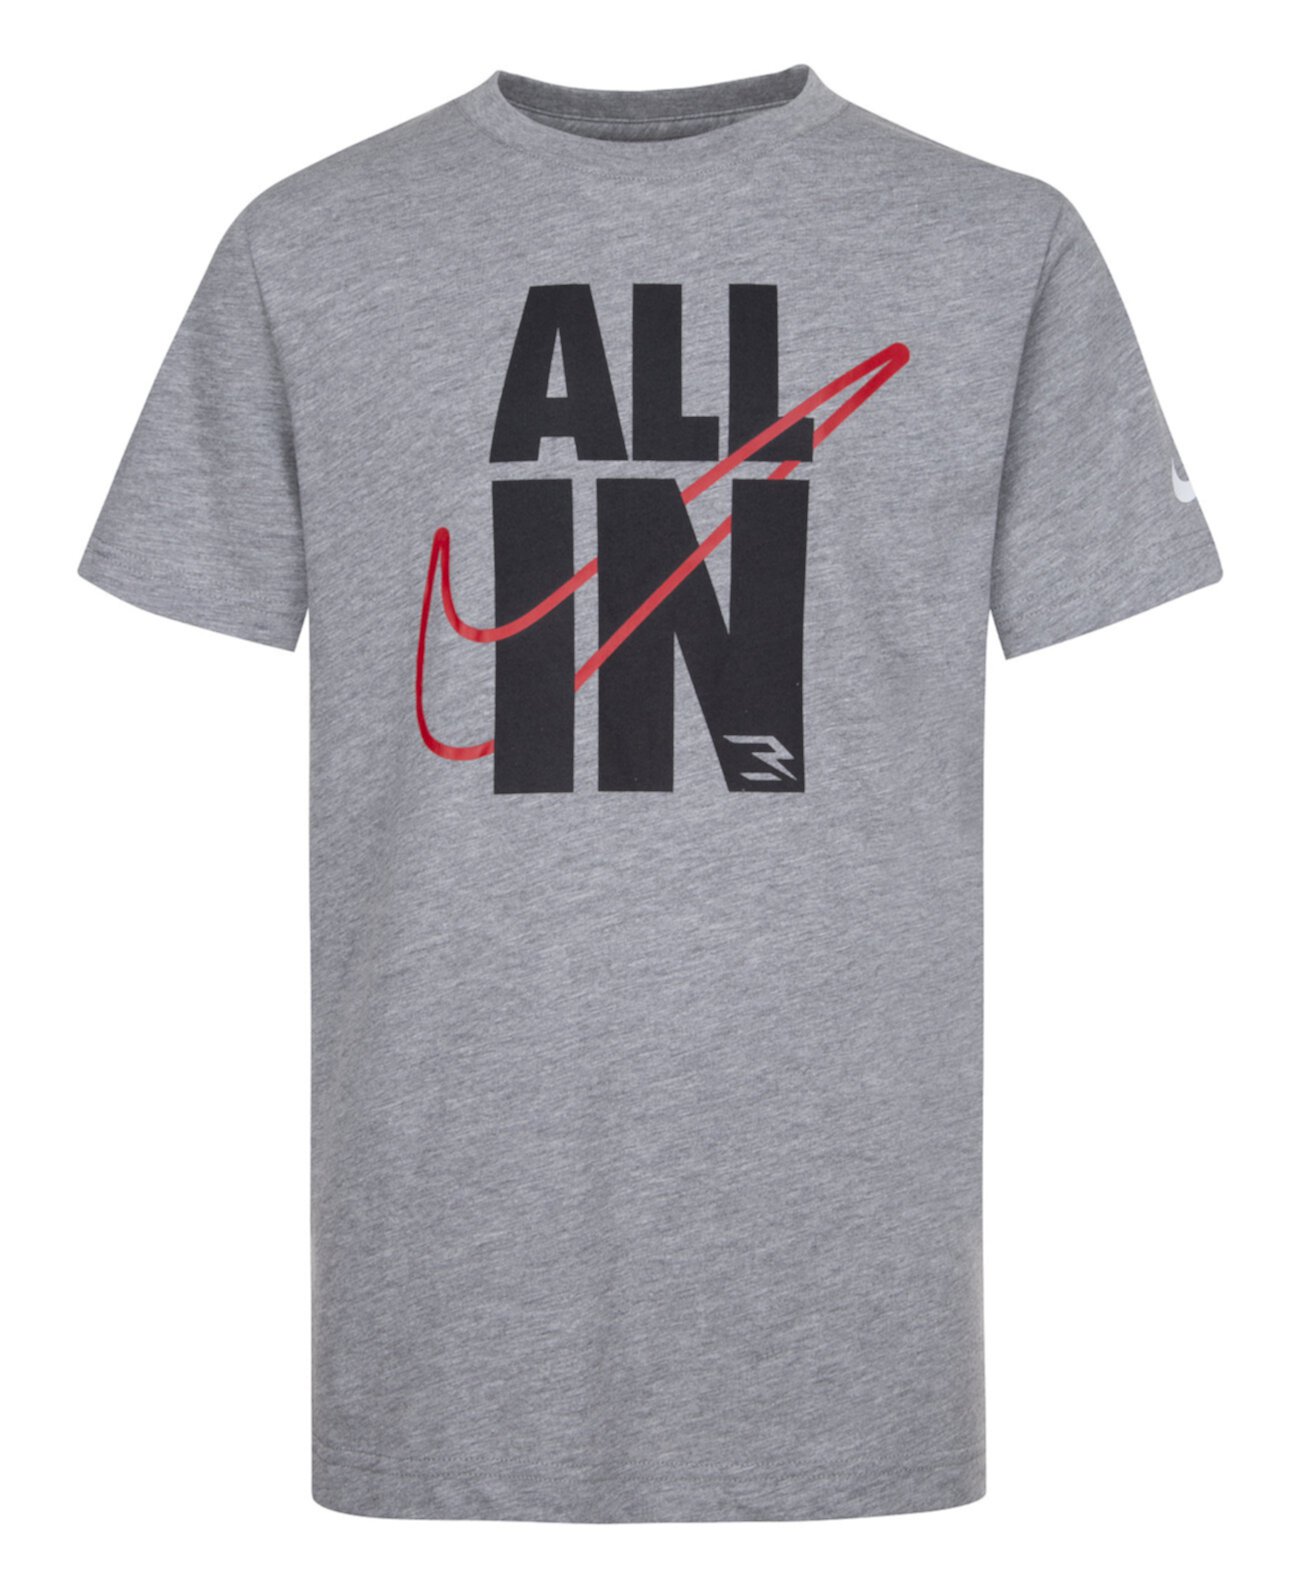 Big Boys All In Short Sleeve T-shirt Nike 3BRAND by Russell Wilson